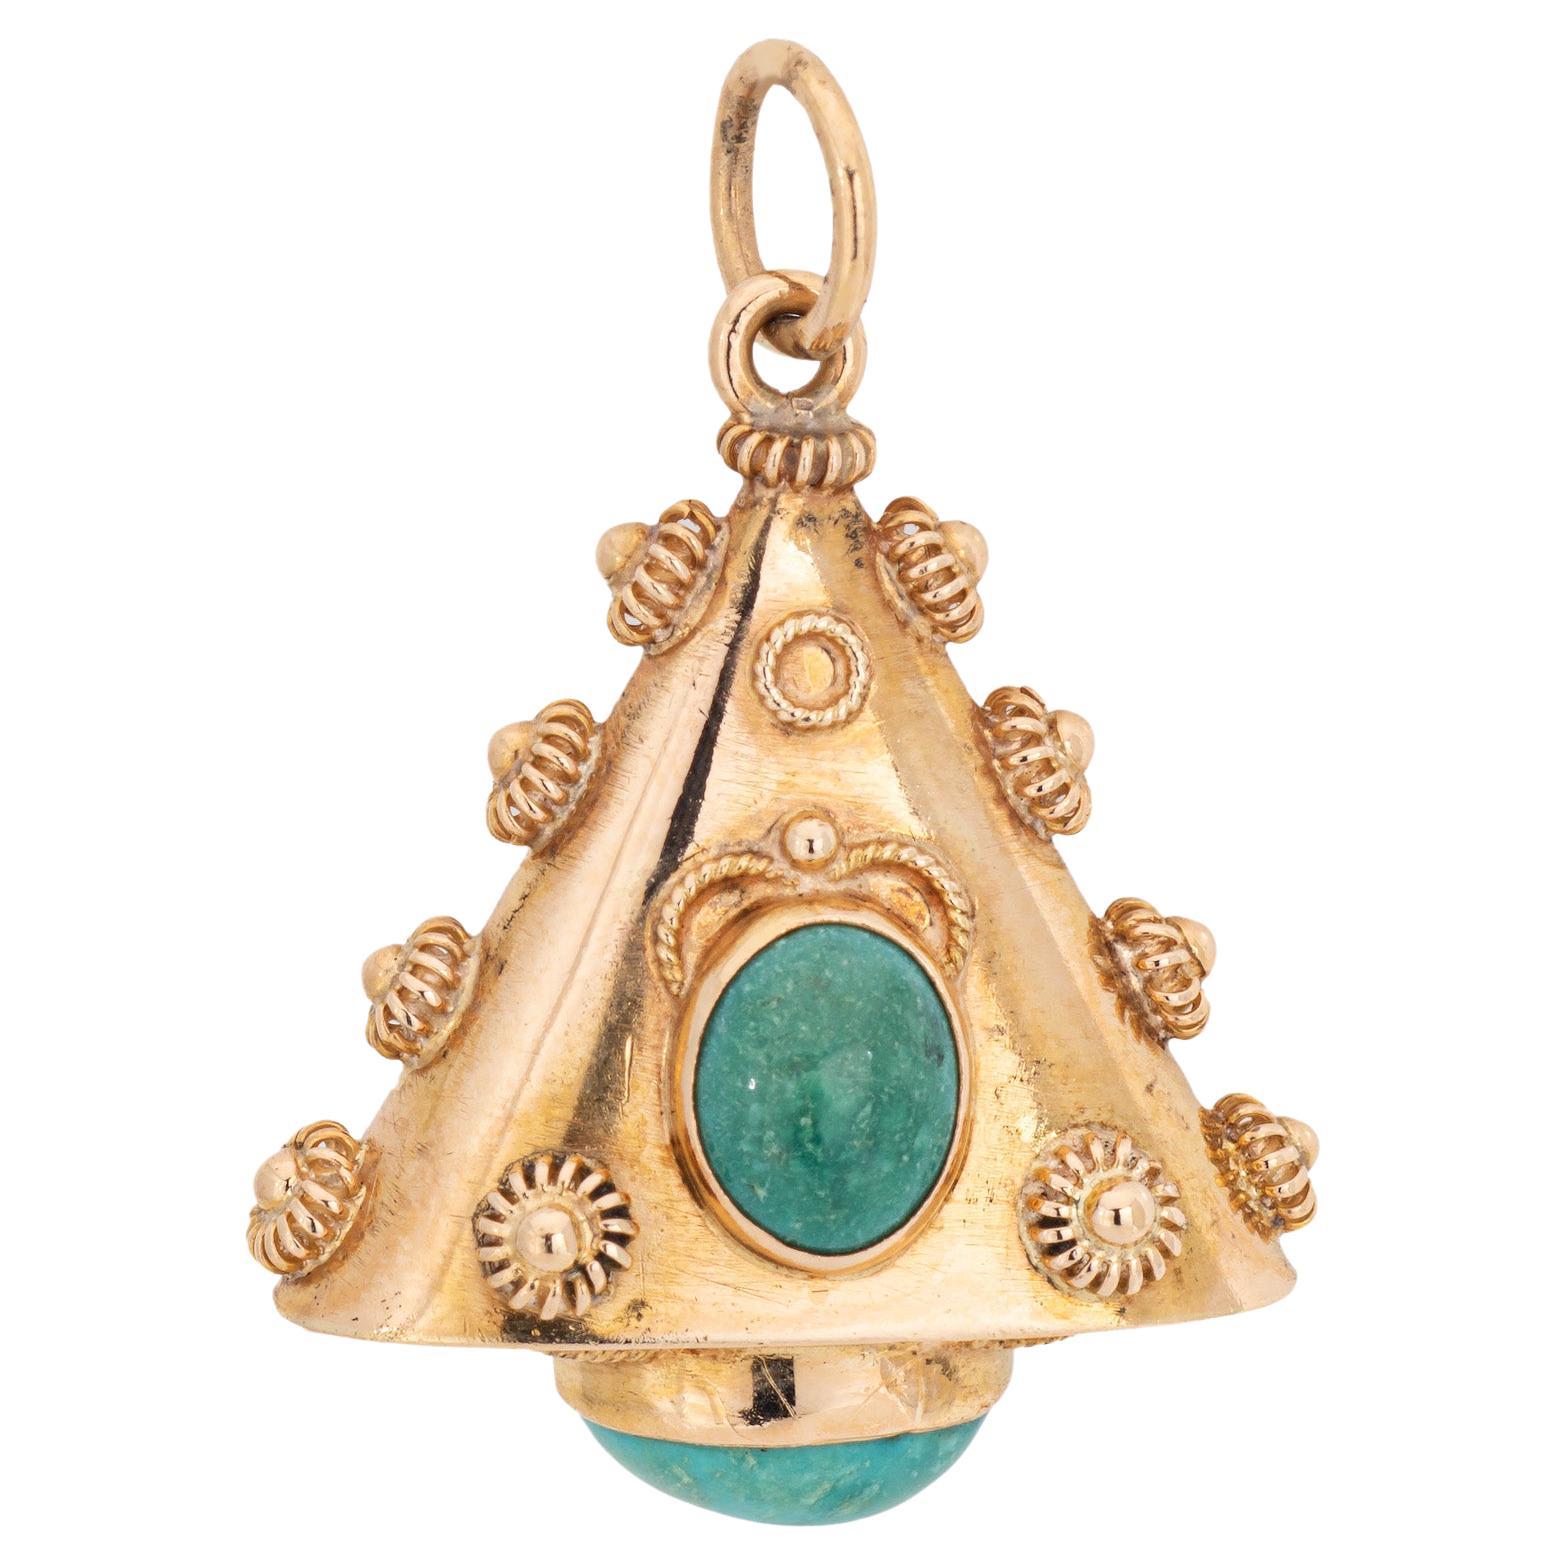 60s Turquoise Charm Vintage Etruscan Revival 18k Yellow Gold Triangle Pendant 